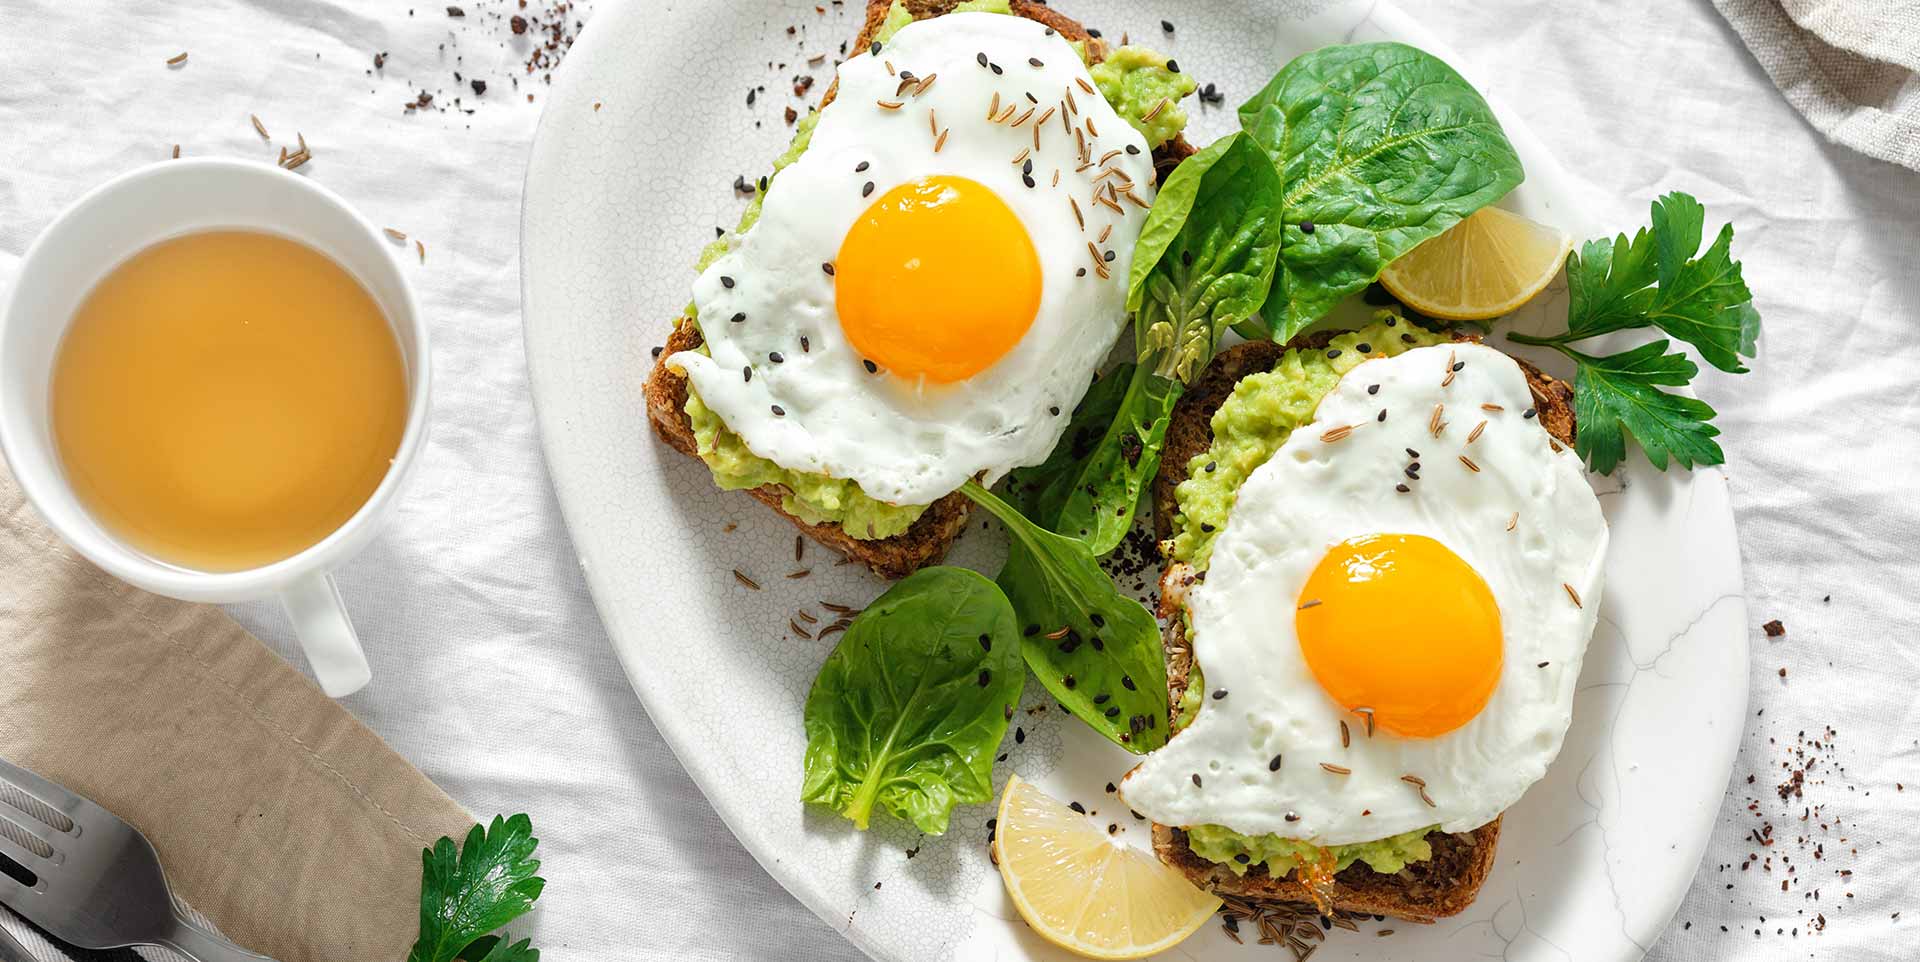 Healthy breakfast ideas for a well-balanced lifestyle